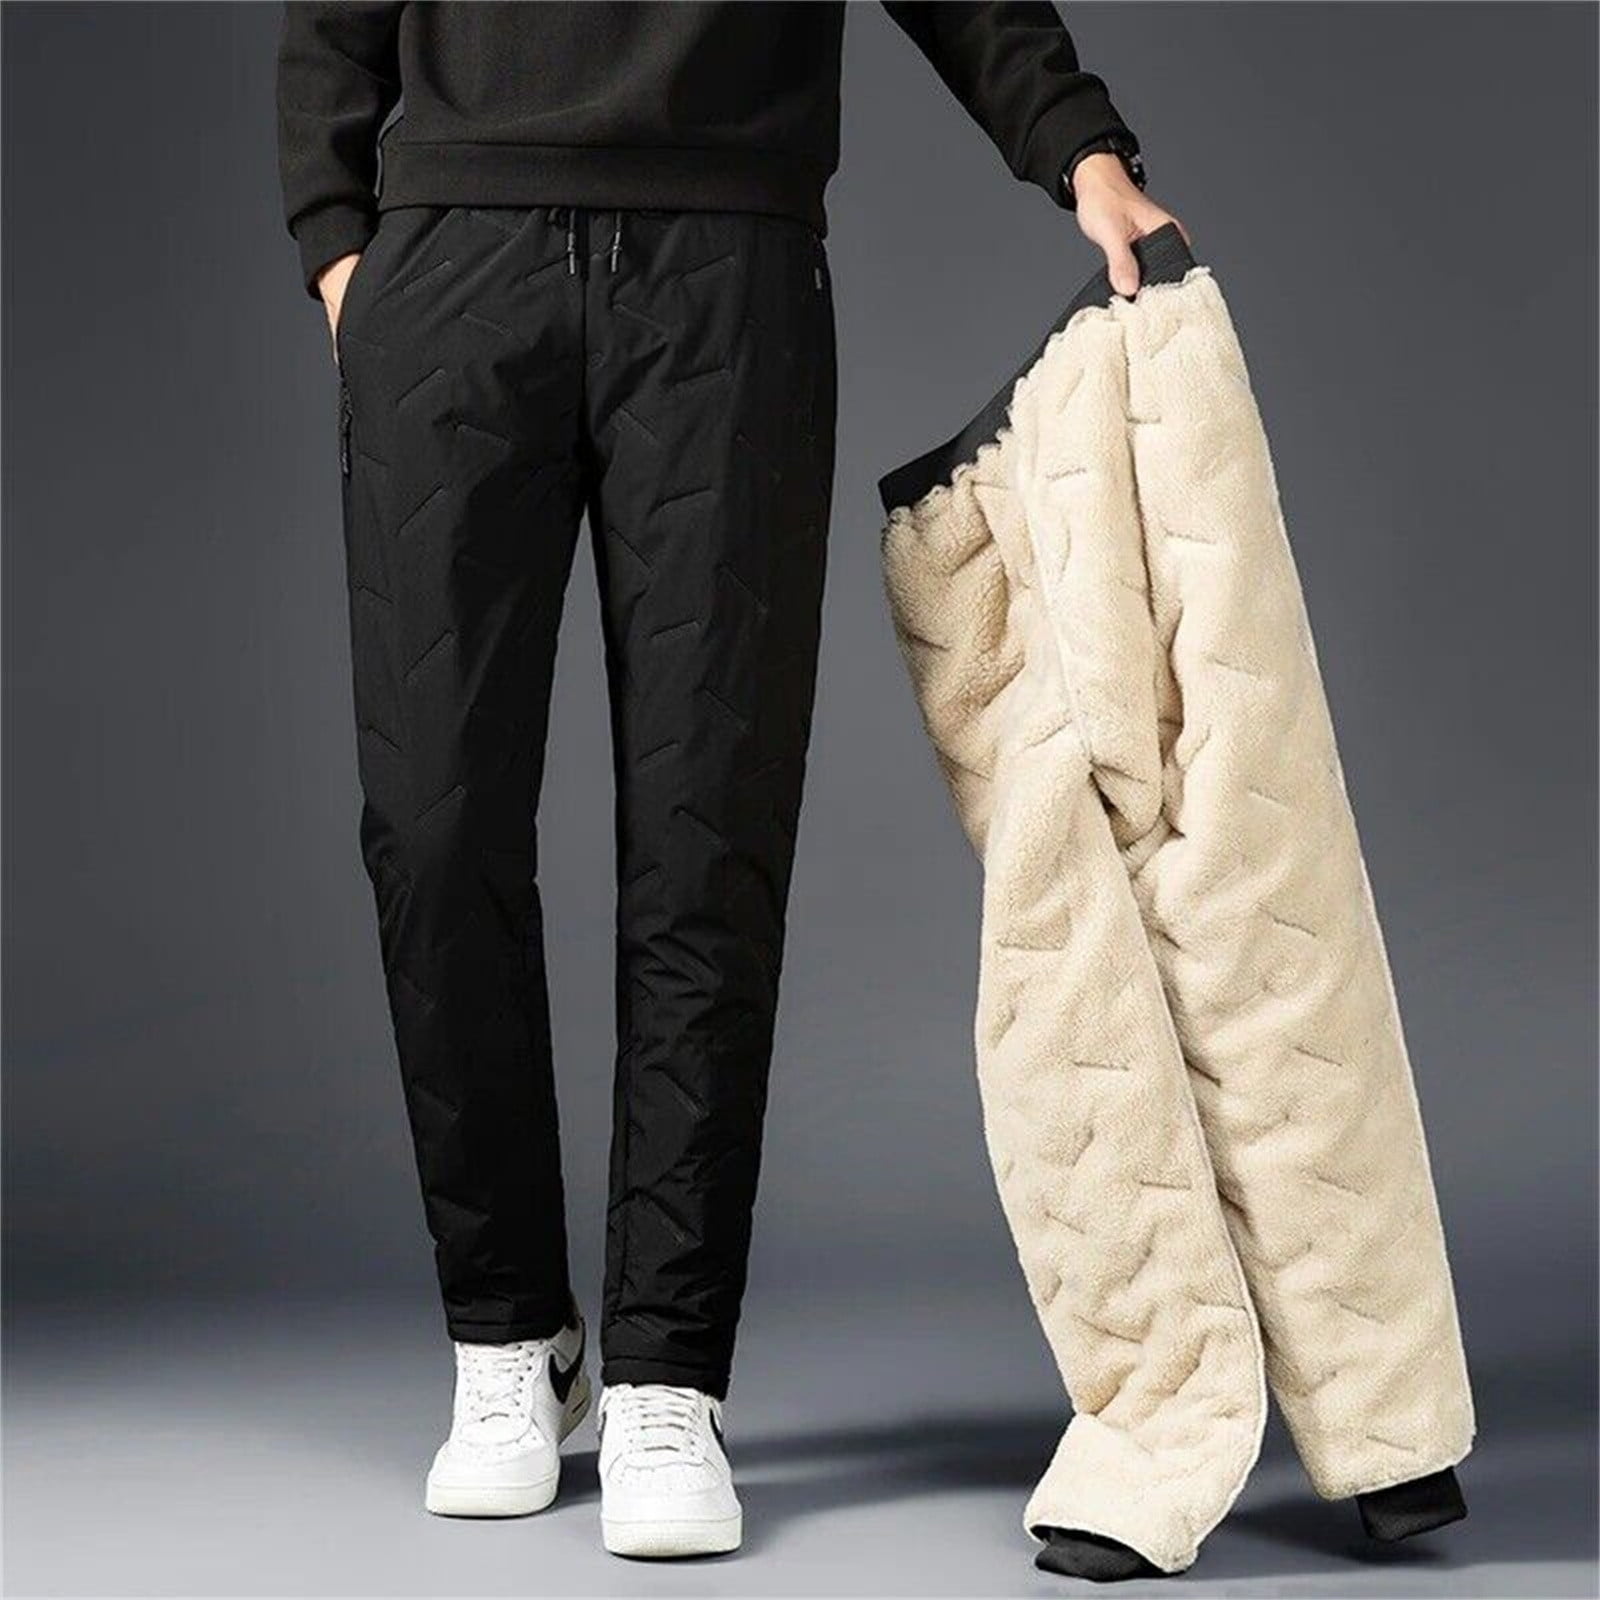 Cargo Pants Mens Lined Sweatpants Winter Warm Fuzzy Leggings Joggers Heavy  Duty Active Running Pants Trousers 